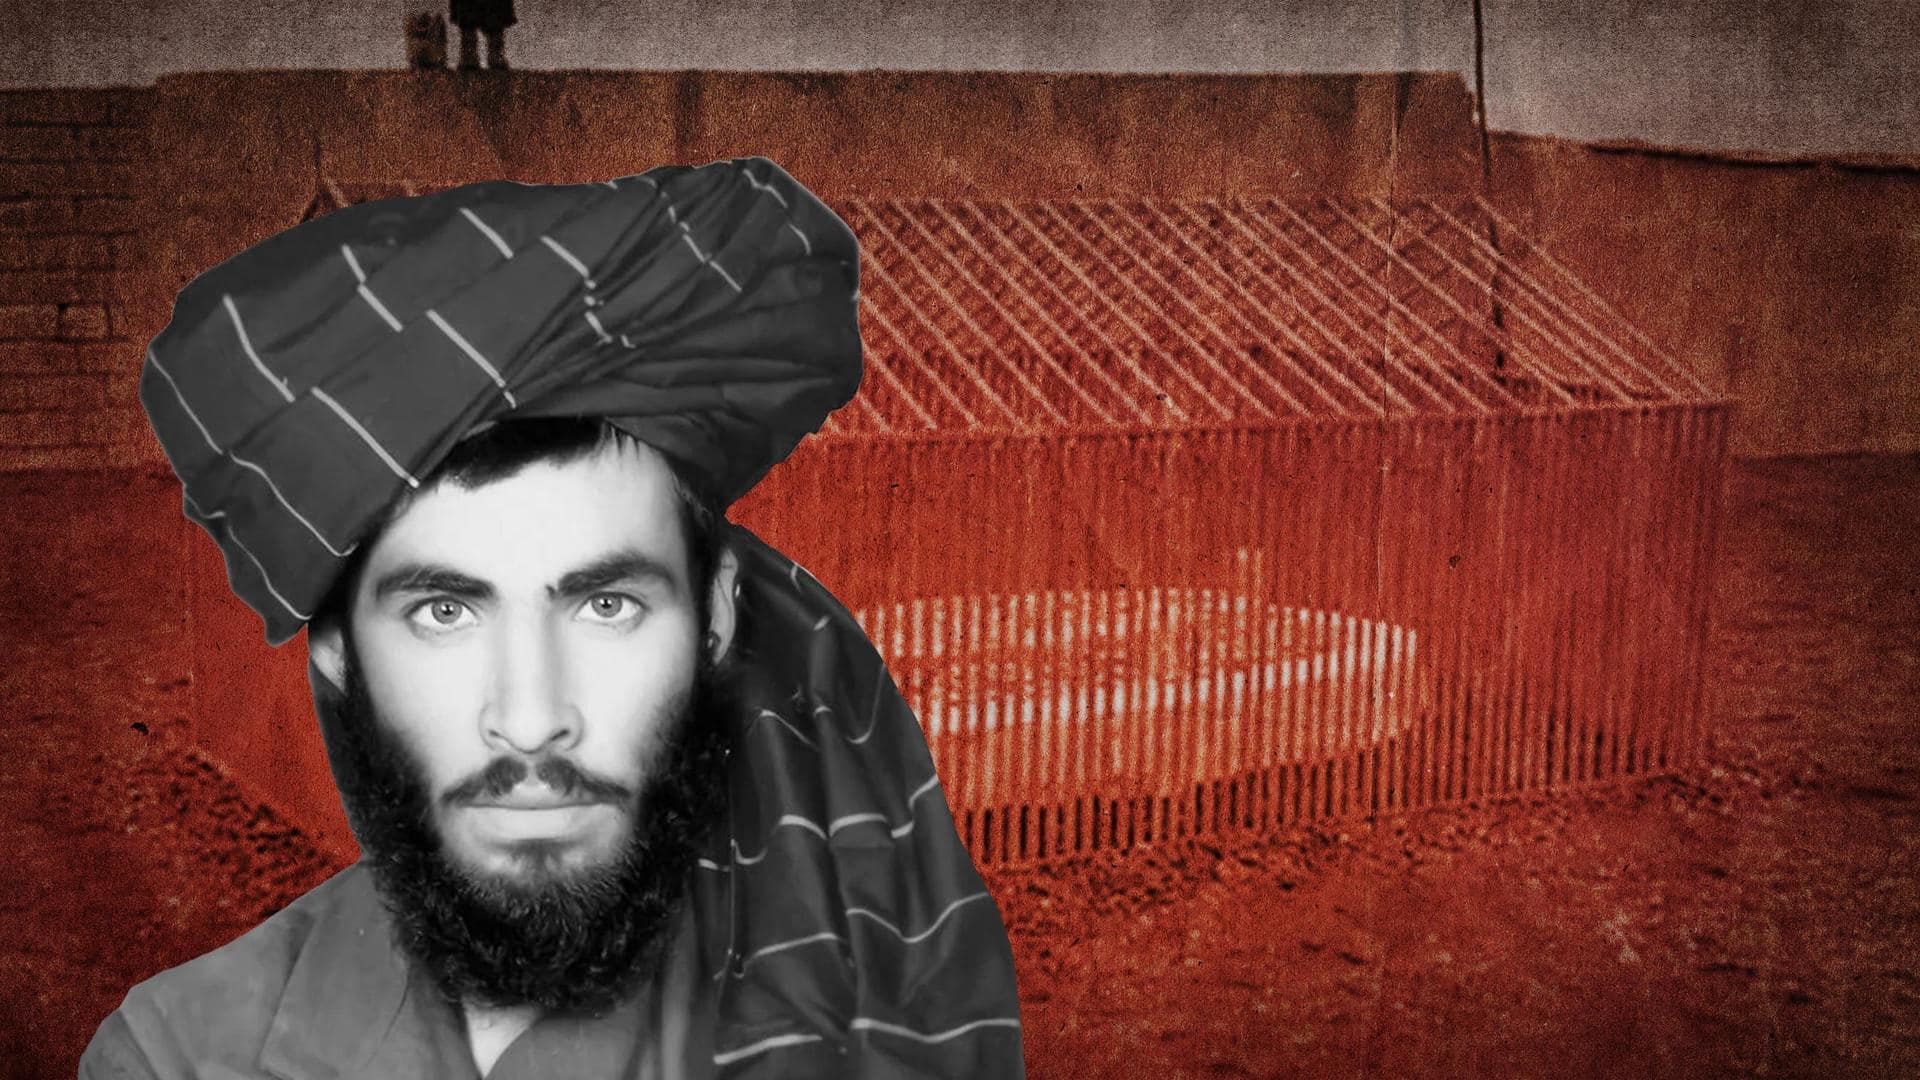 Taliban reveals founder Mullah Omar's burial place 9yrs after death